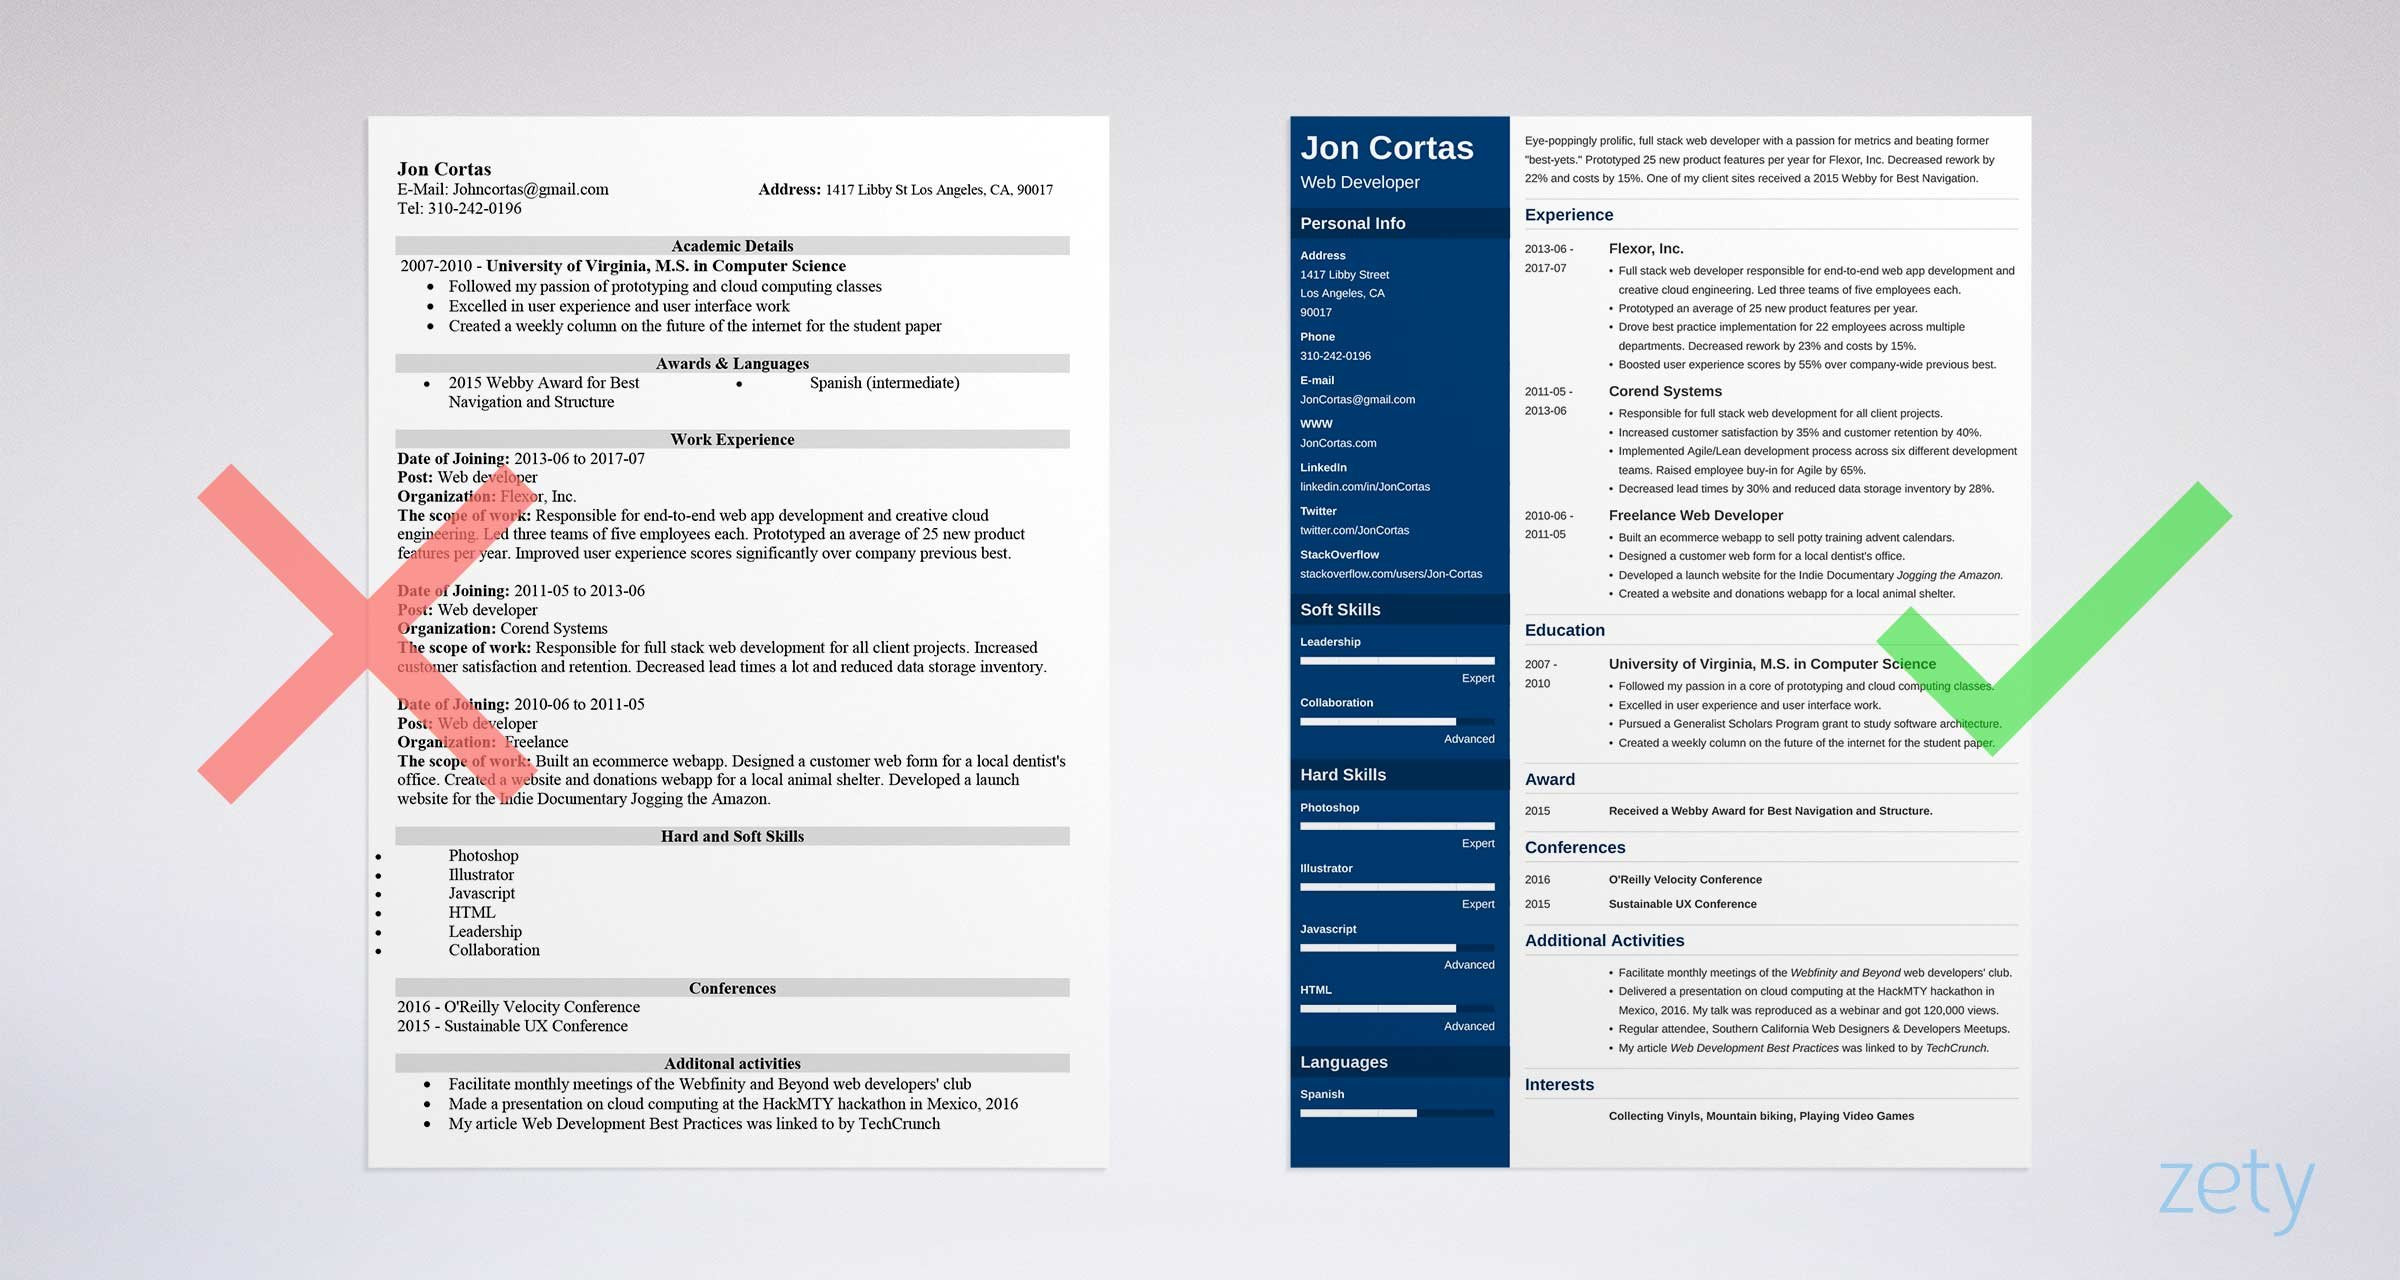 Sample Resume with One Long Term Job How Long Should A Resume Be? (ideal Resume Length)